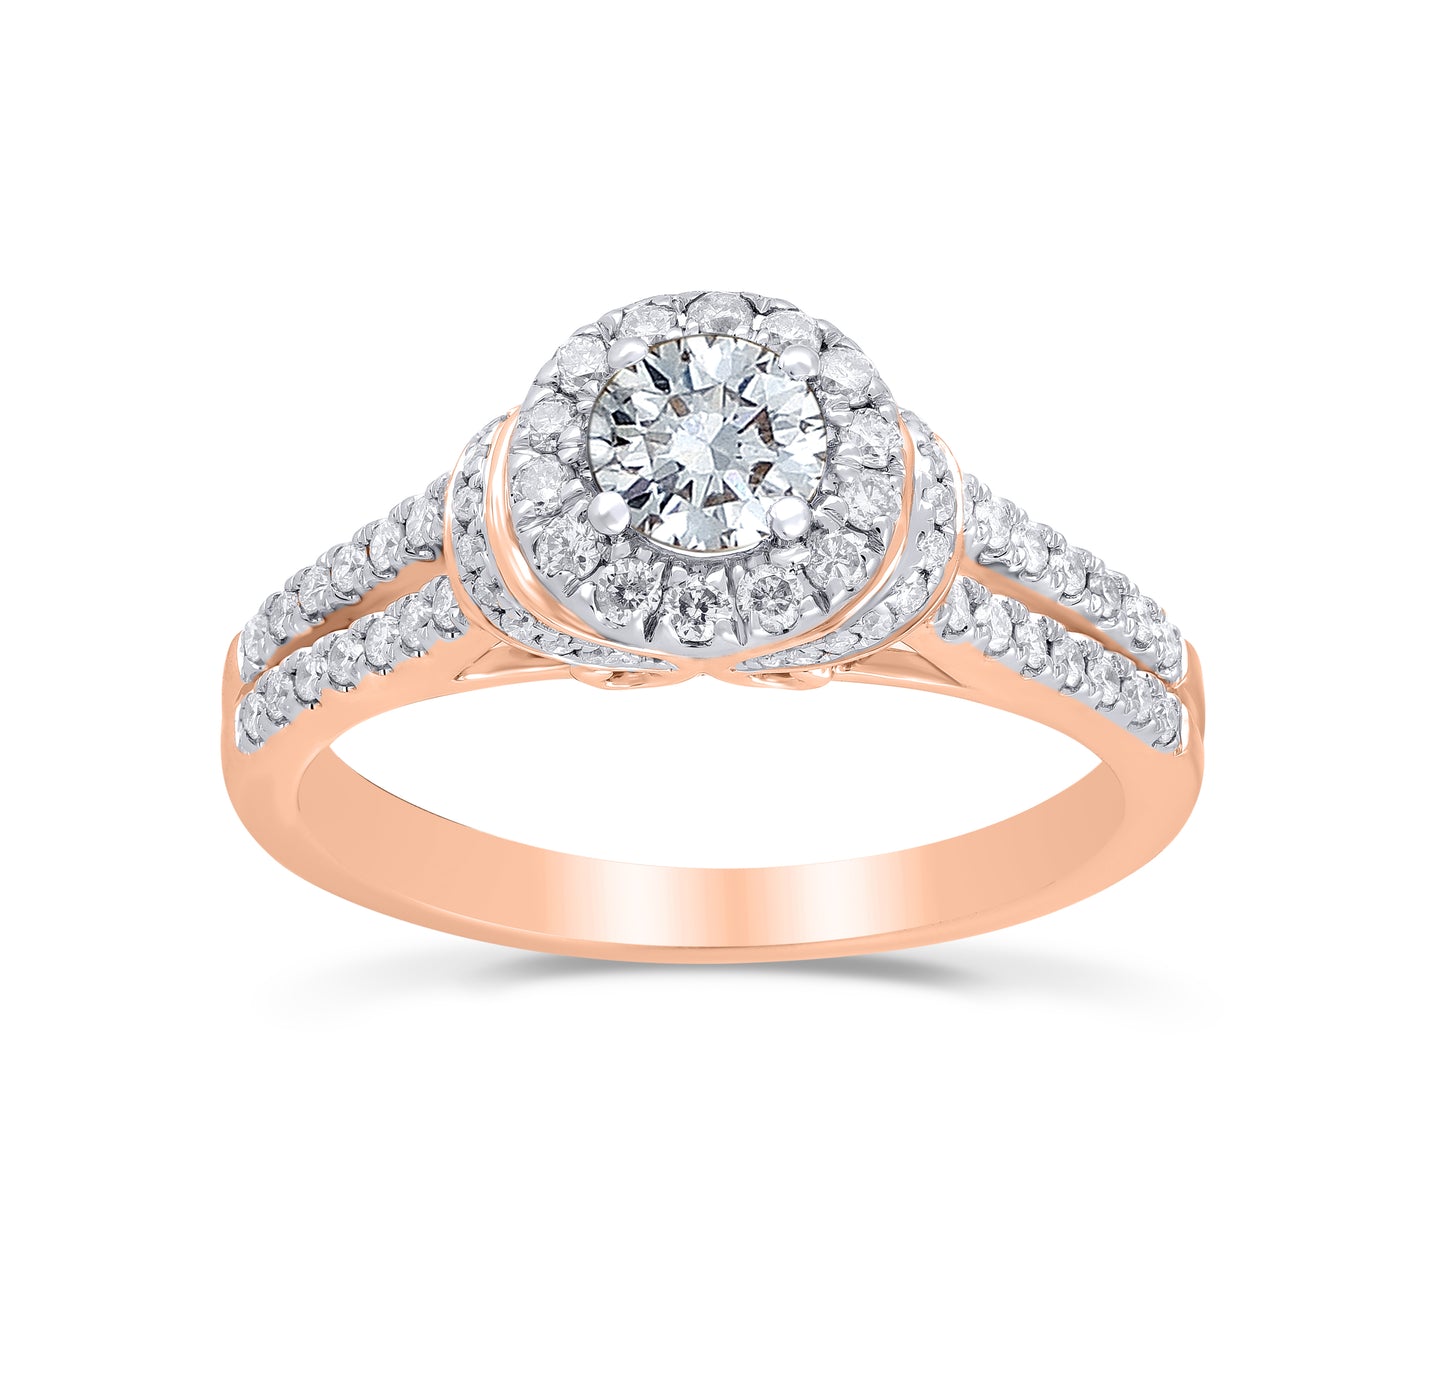 Halo Engagement Ring in 14K Gold